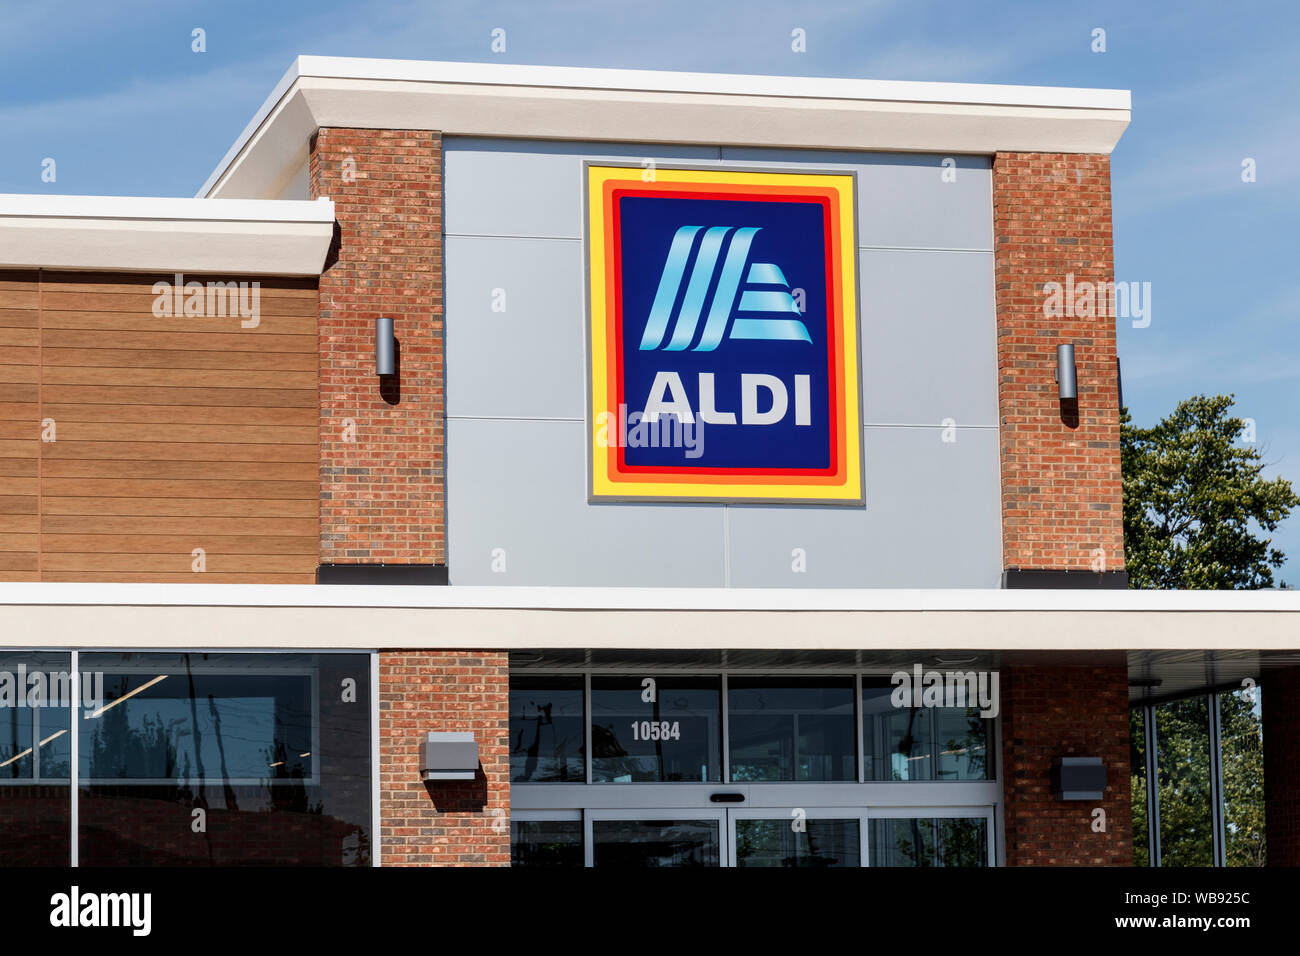 Carmel - Circa August 2019: Aldi Discount Supermarket. Aldi sells a range of grocery items, including produce, meat & dairy, at discount prices IV Stock Photo